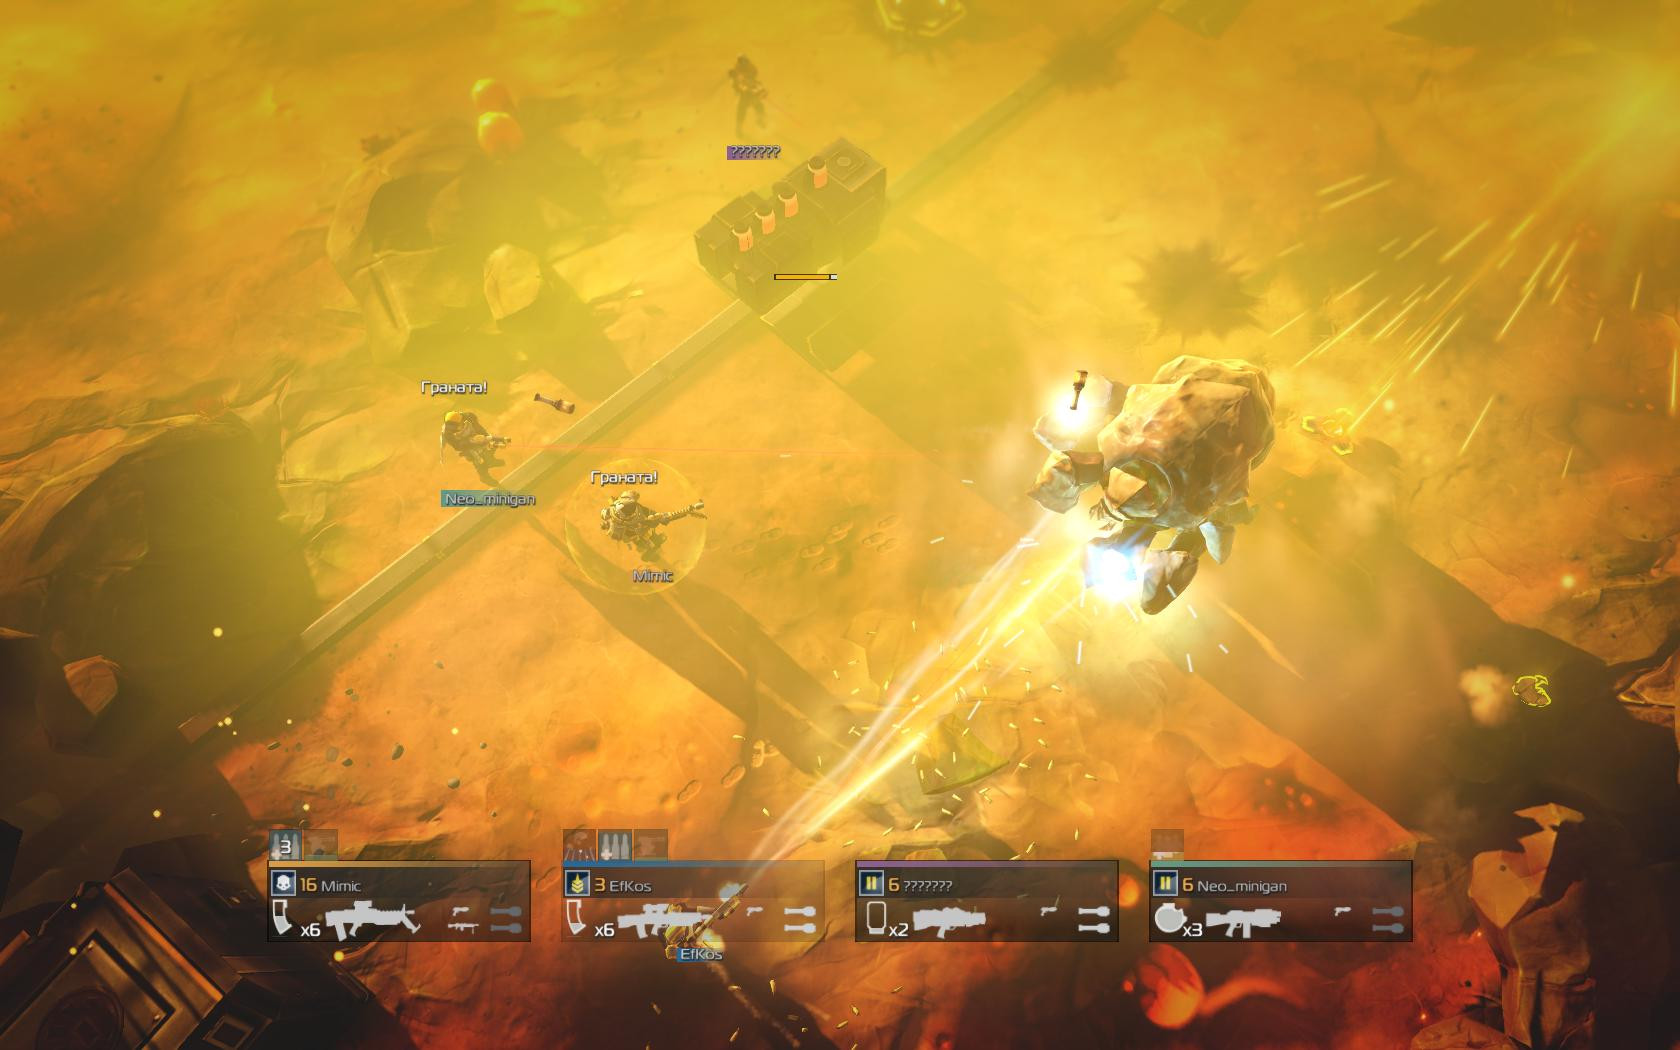 Helldivers digital deluxe